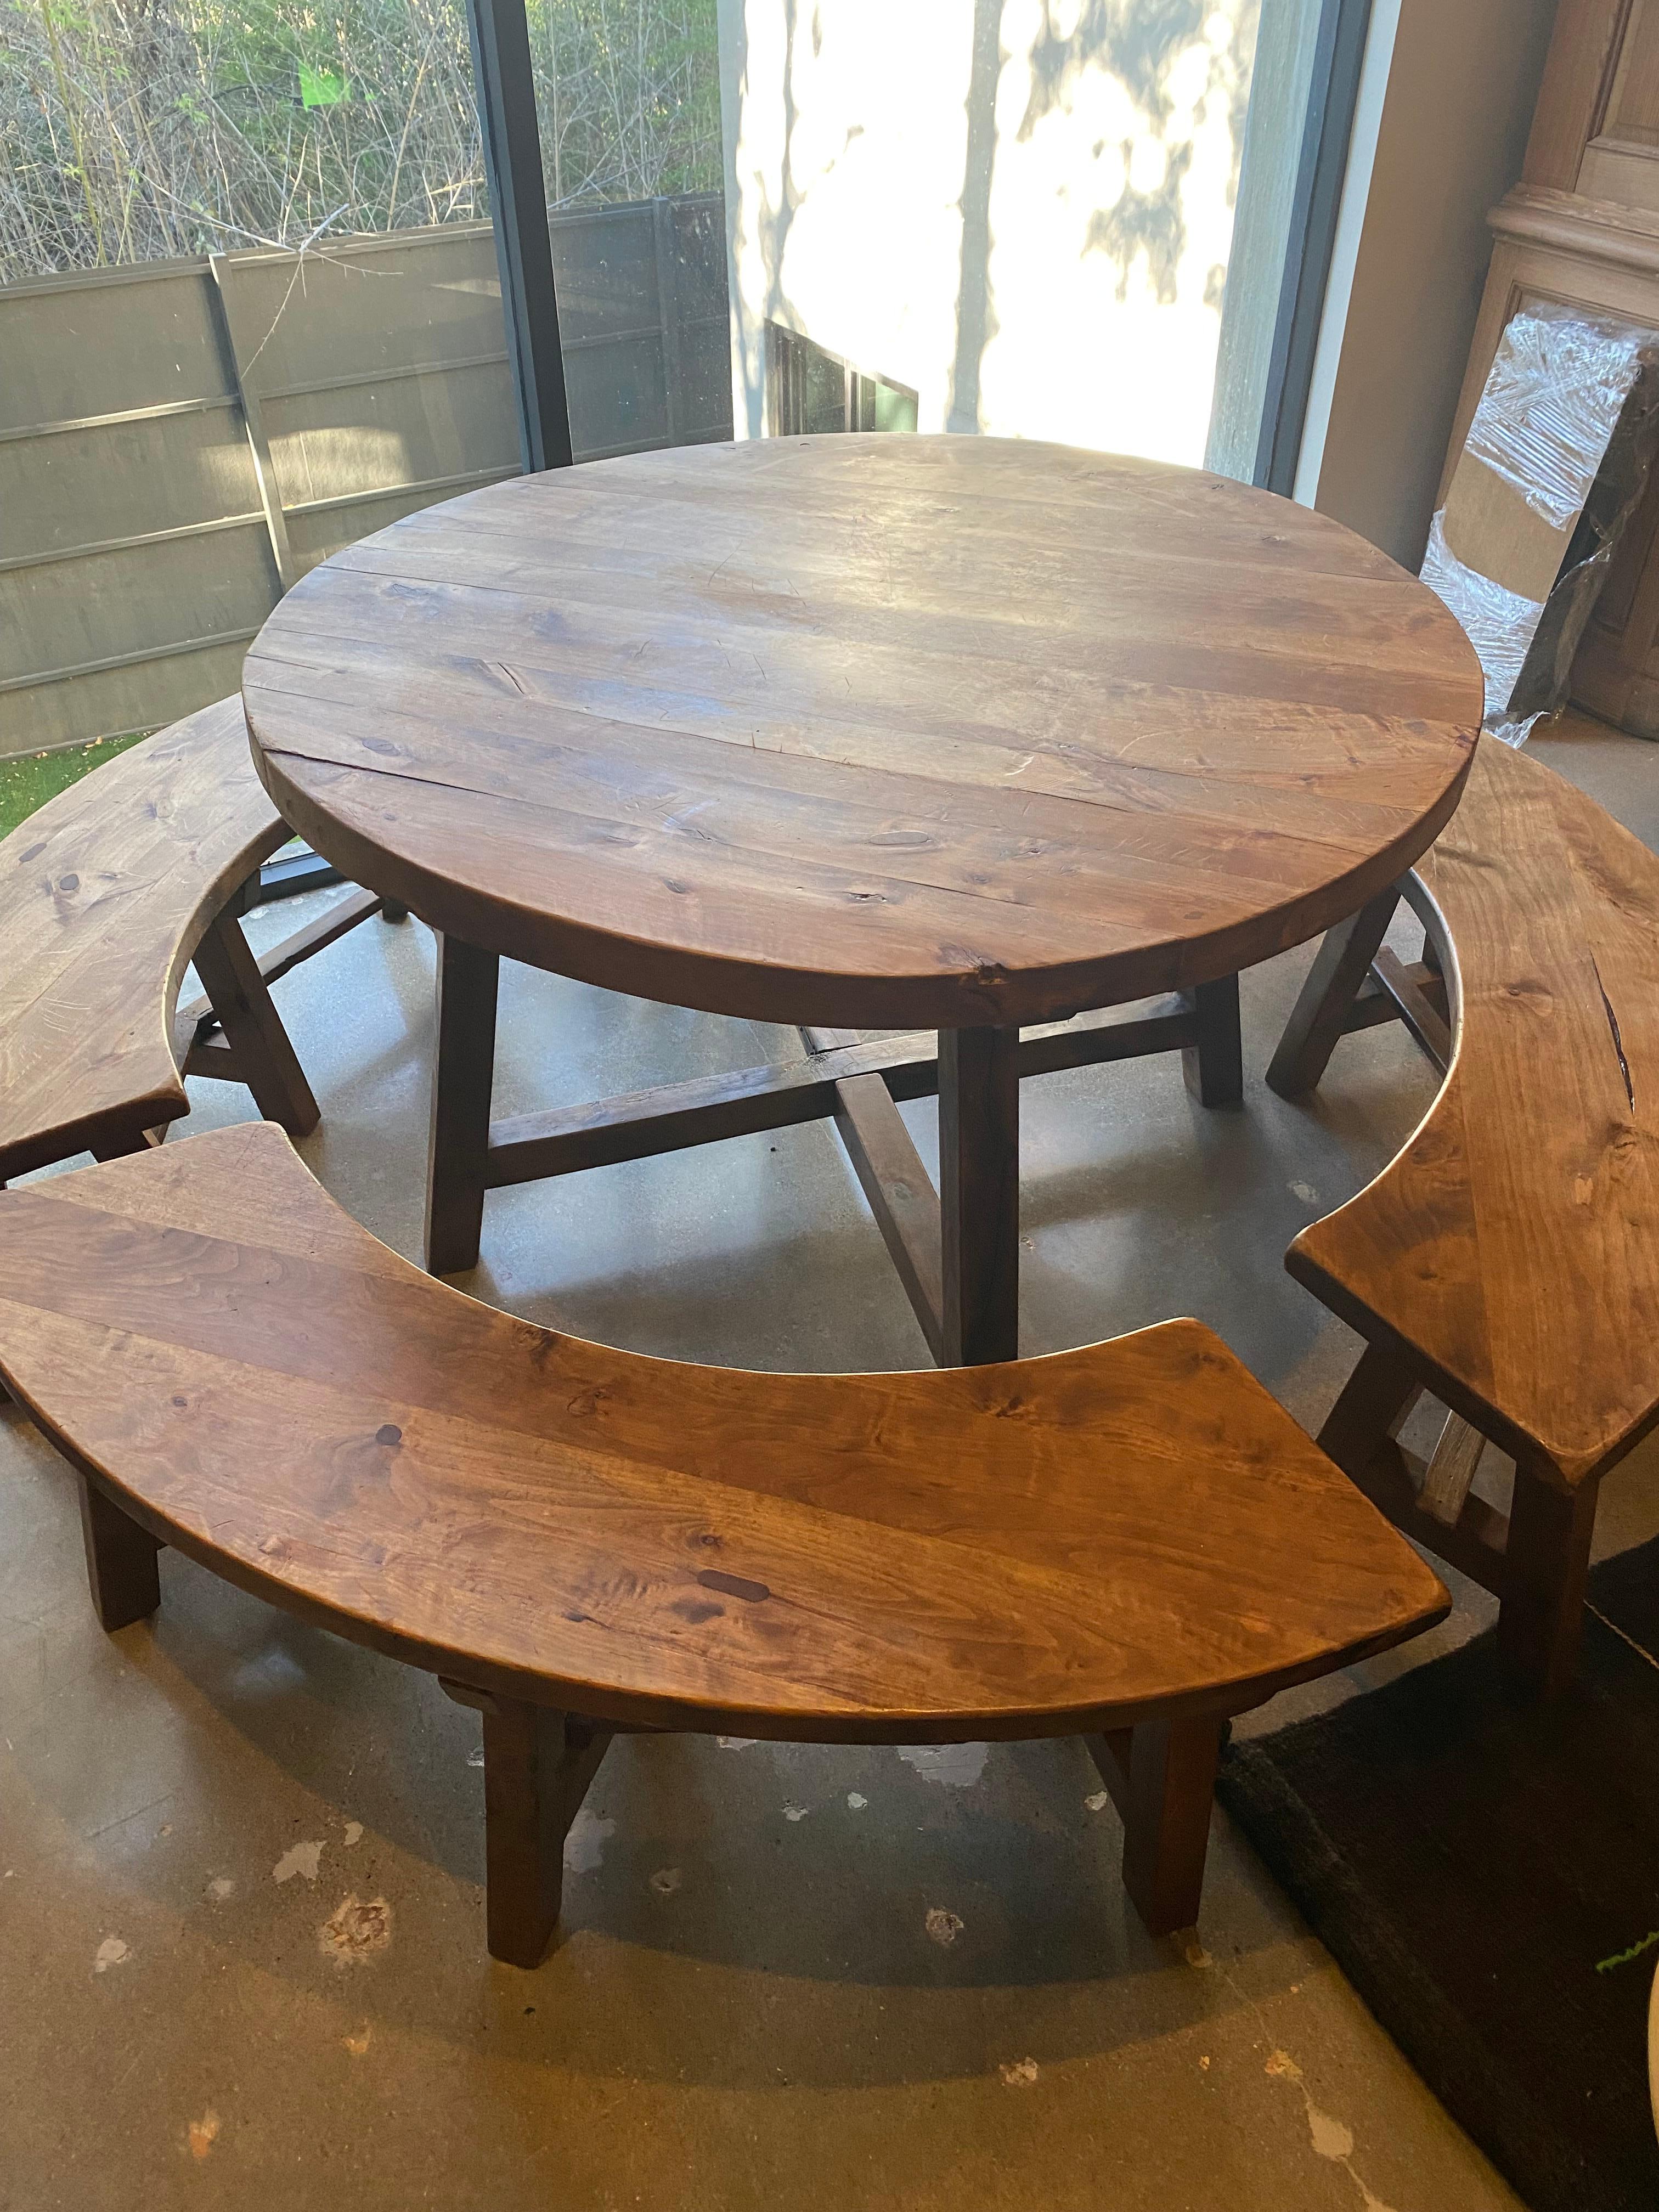 Mid-century Chalet style round dining table with four matching benches. Hand crafted in solid hardwood (Elm?) with trestle bases and forged iron hardware on table. Indicative of the rustic mountain style made for French Alps estates in the